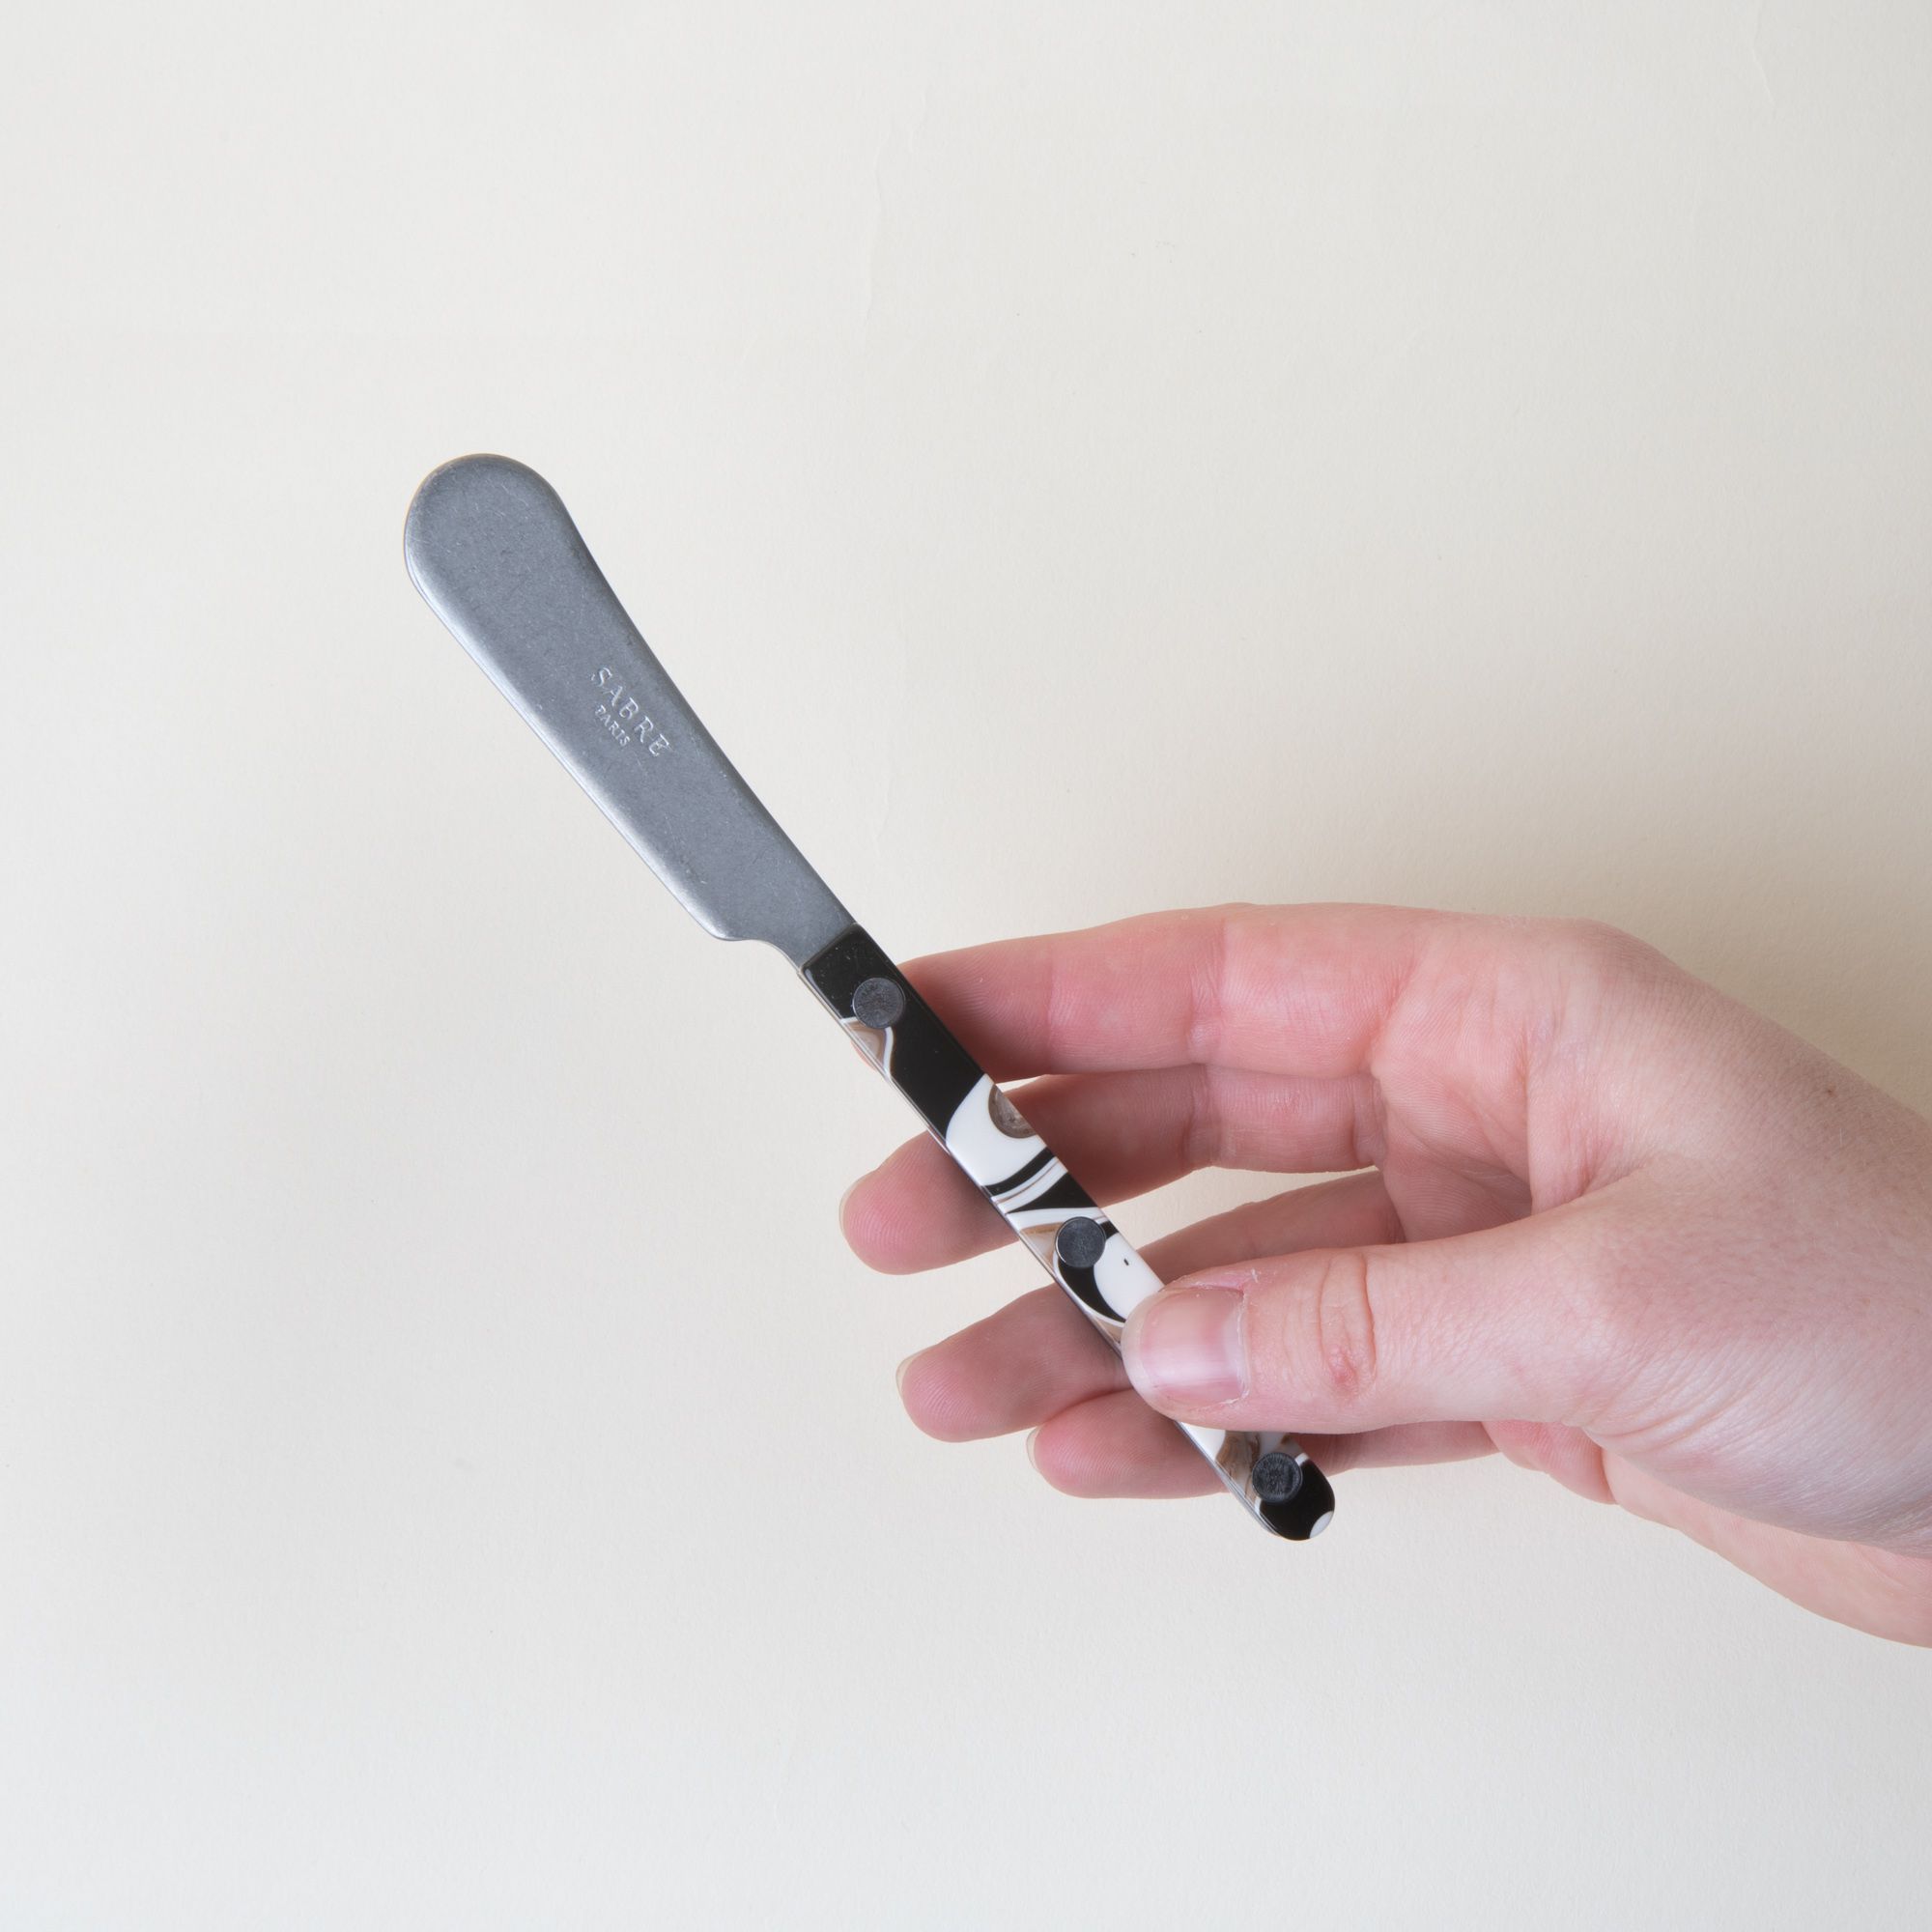 A hand holding a butter knife with a stainless steel blade and an acrylic black, white, and brown handle